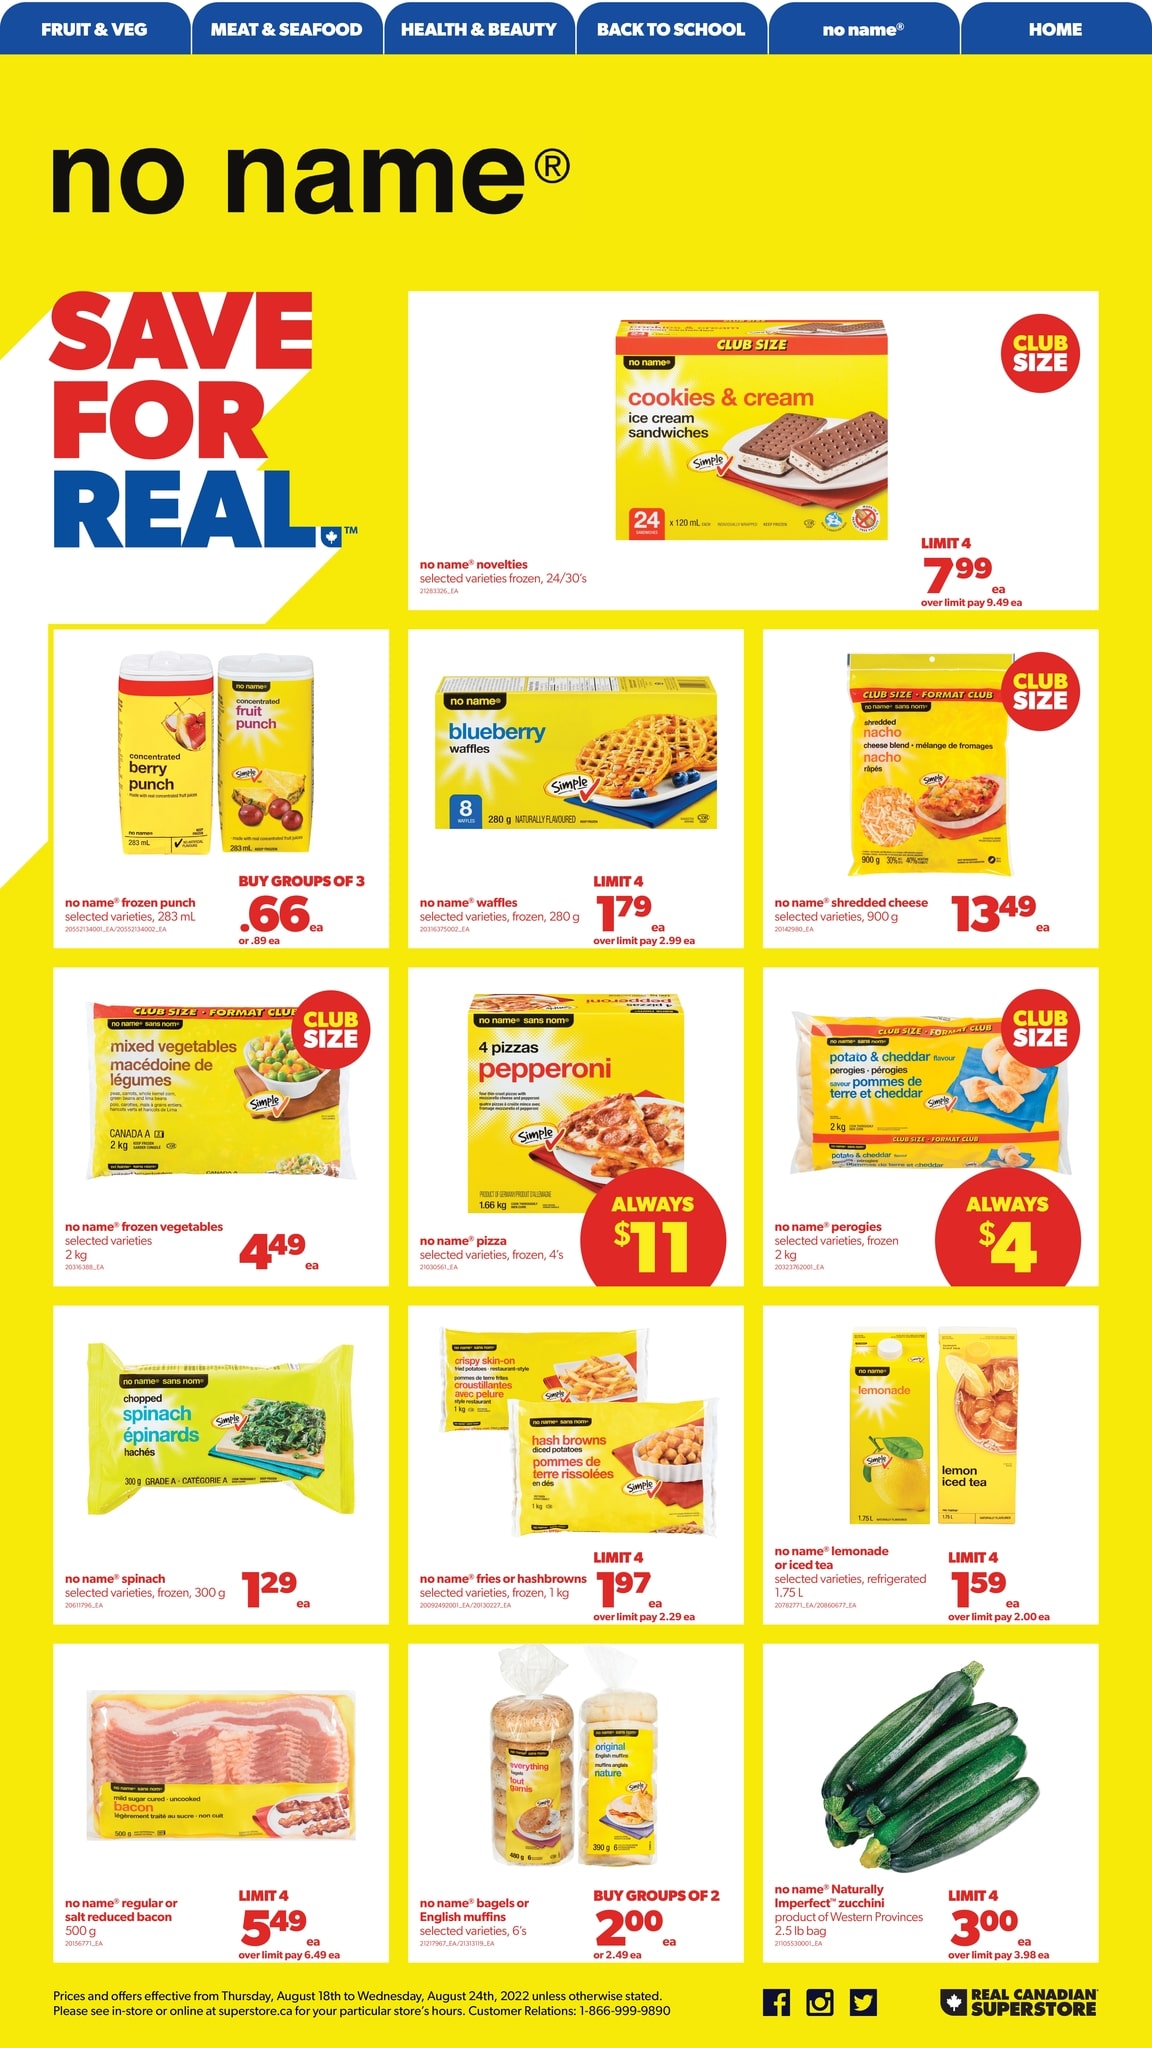 Real Canadian Superstore Western Canada - Weekly Flyer Specials - Page 8